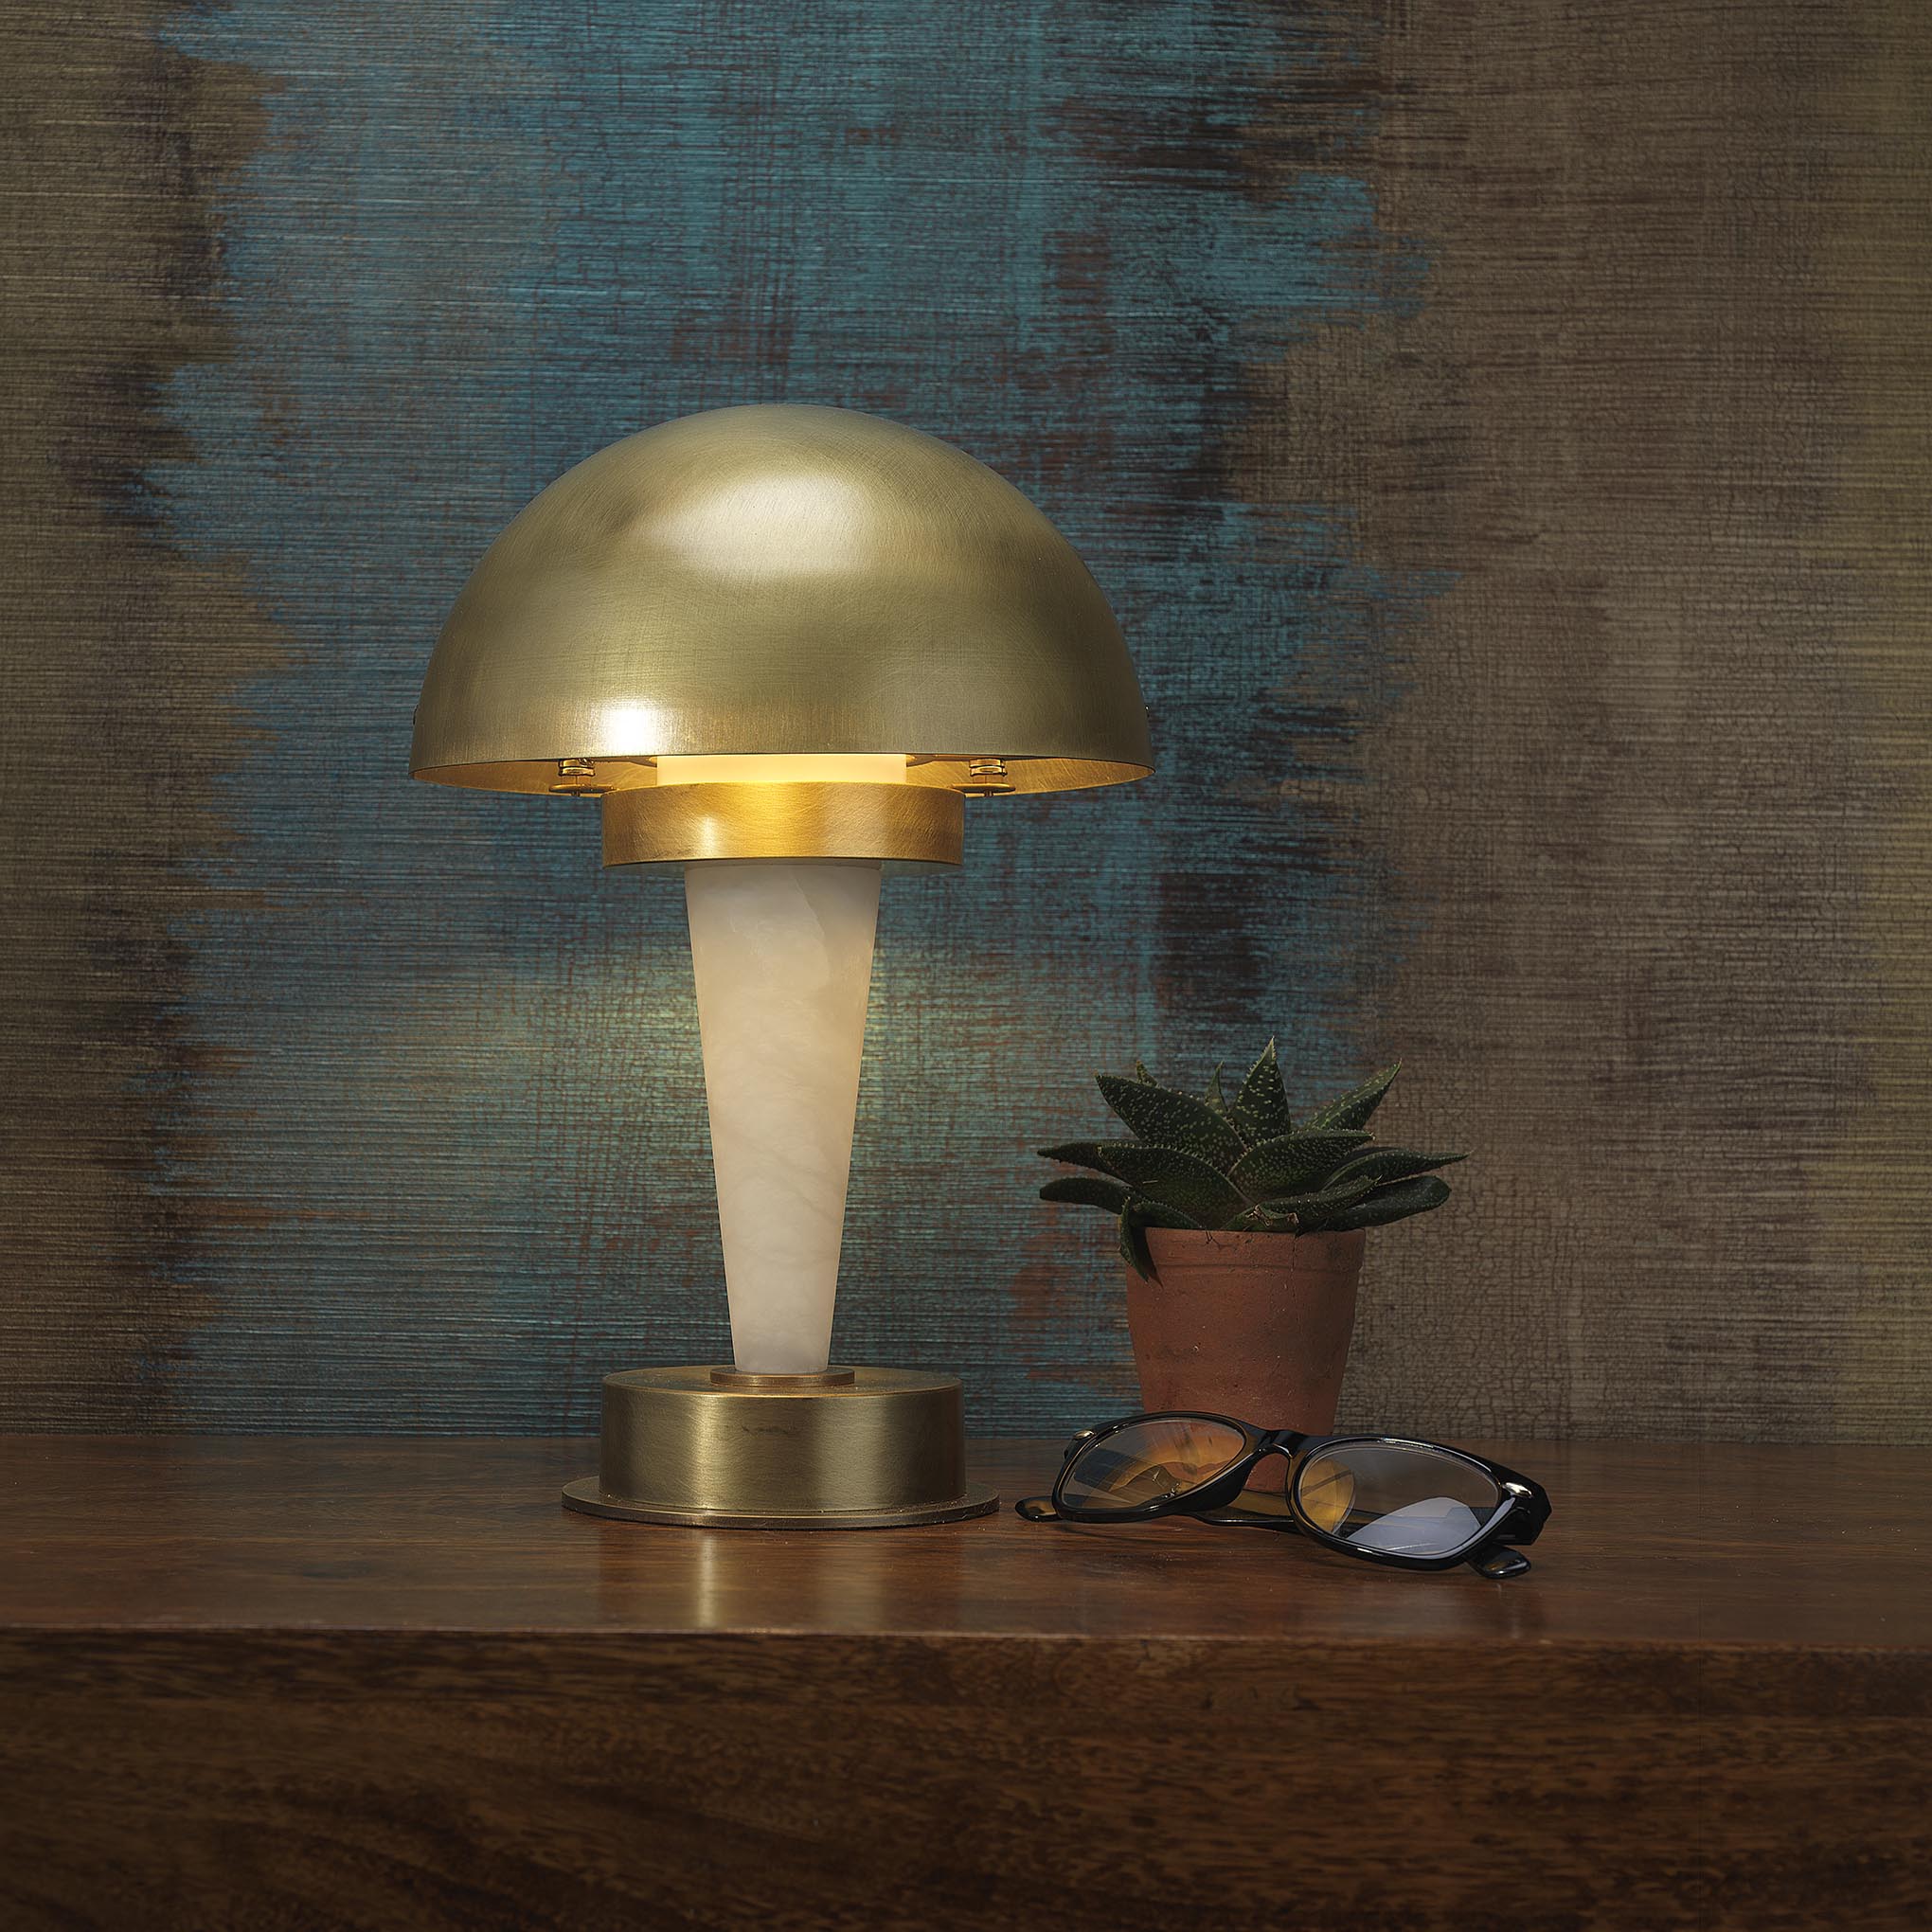 The Ebury is the ultimate in luxury rechargeable lighting. This beautiful table lamp is perfect for all hospitality settings, and features brass and alabaster materials with a solid domed shade.